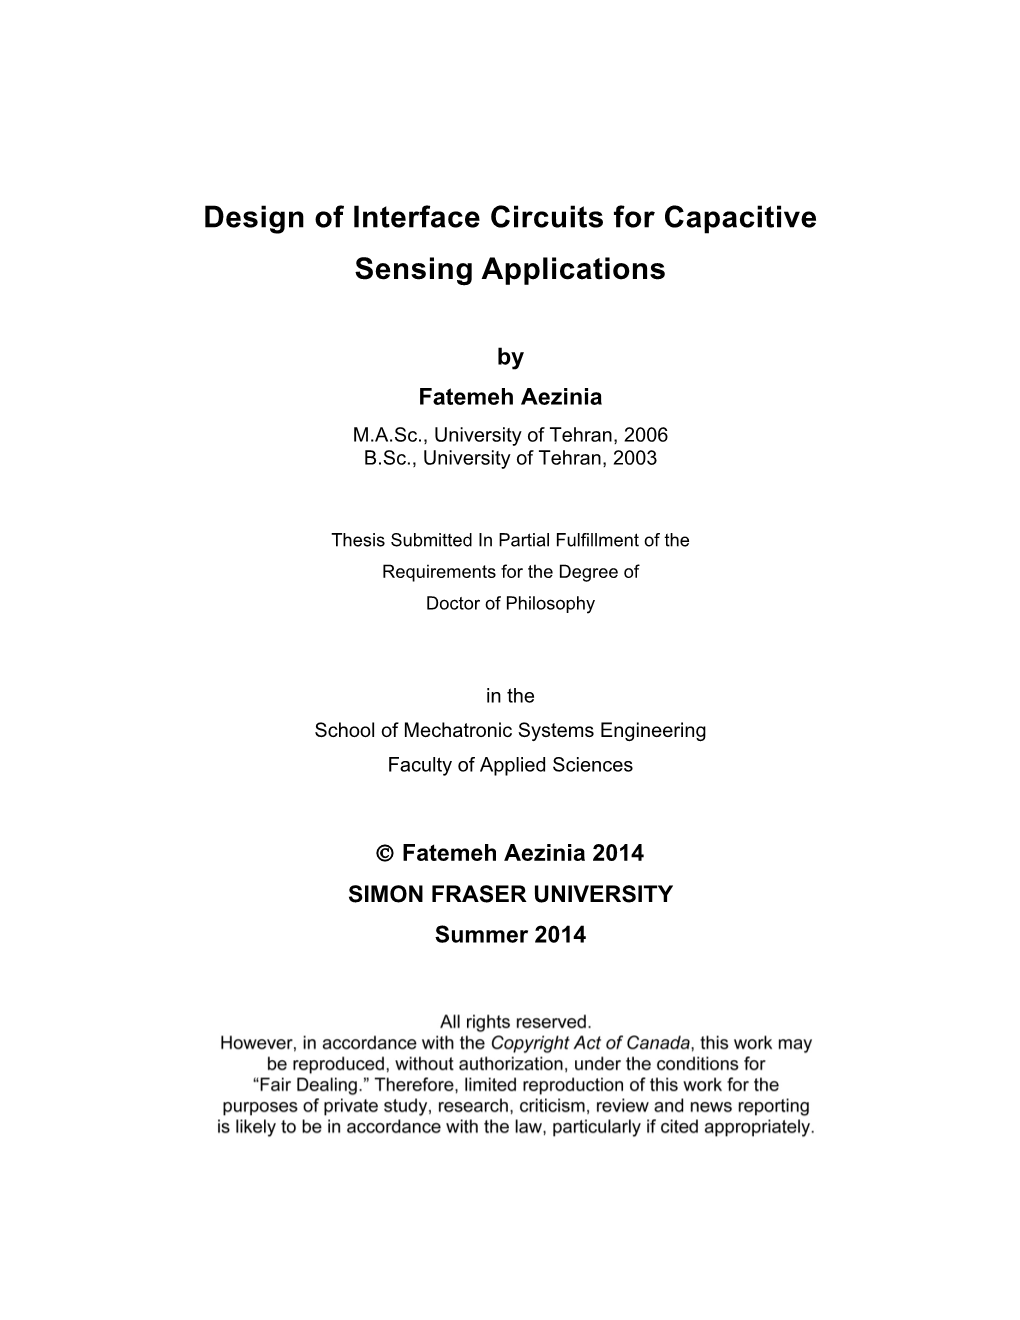 Design of Interface Circuits for Capacitive Sensing Applications